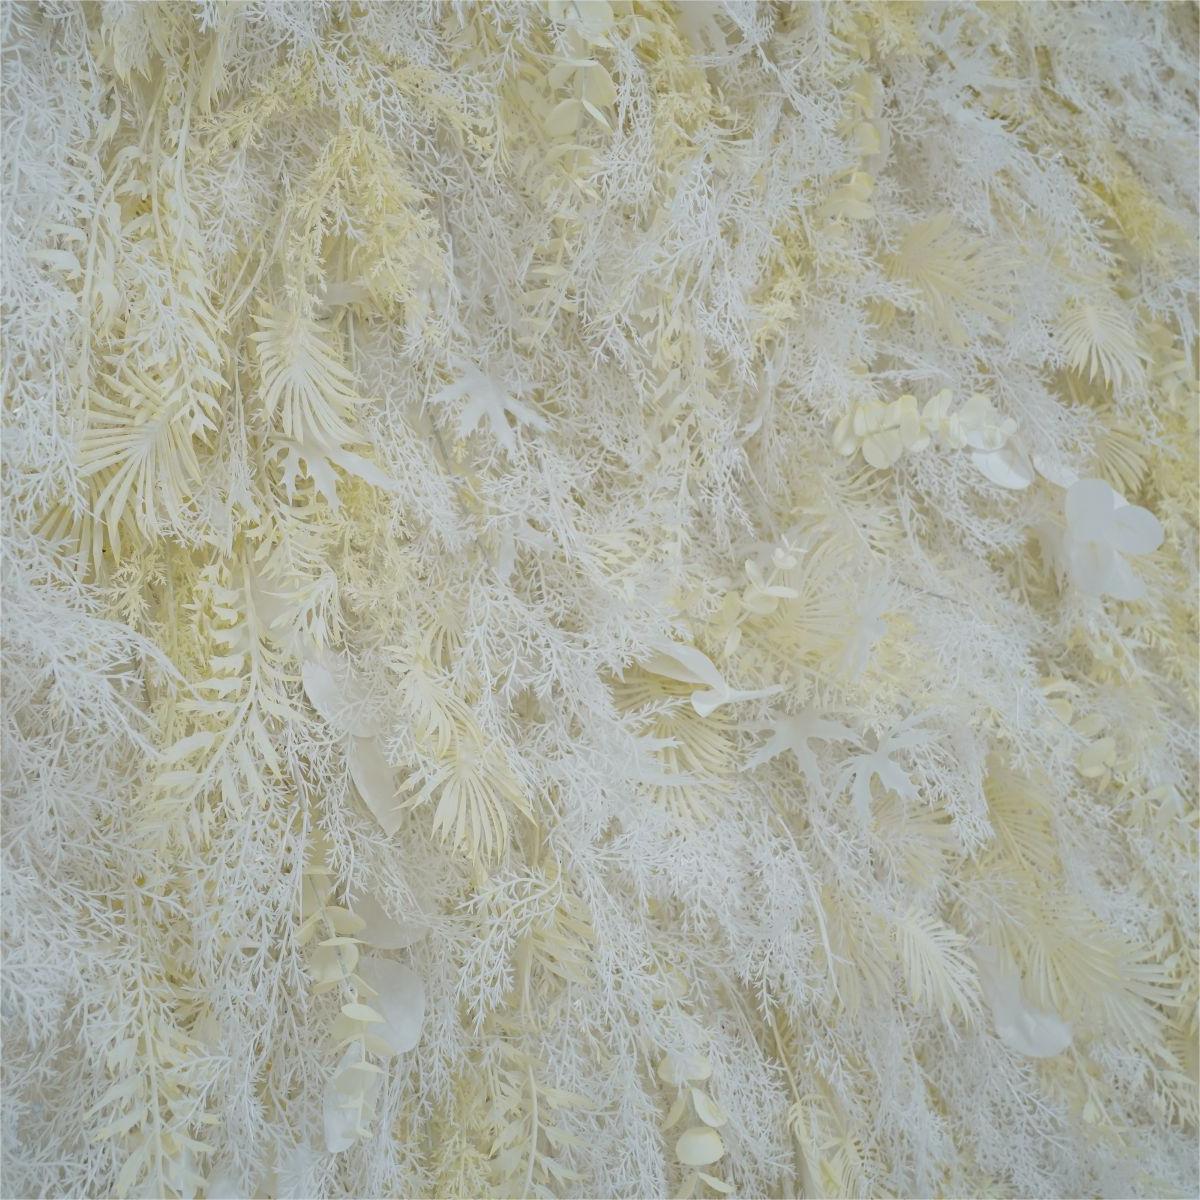 Flower Wall White and Light Yellow Pampas Fabric Rolling Up Curtain Floral Backdrop Wedding Party Proposal Decor